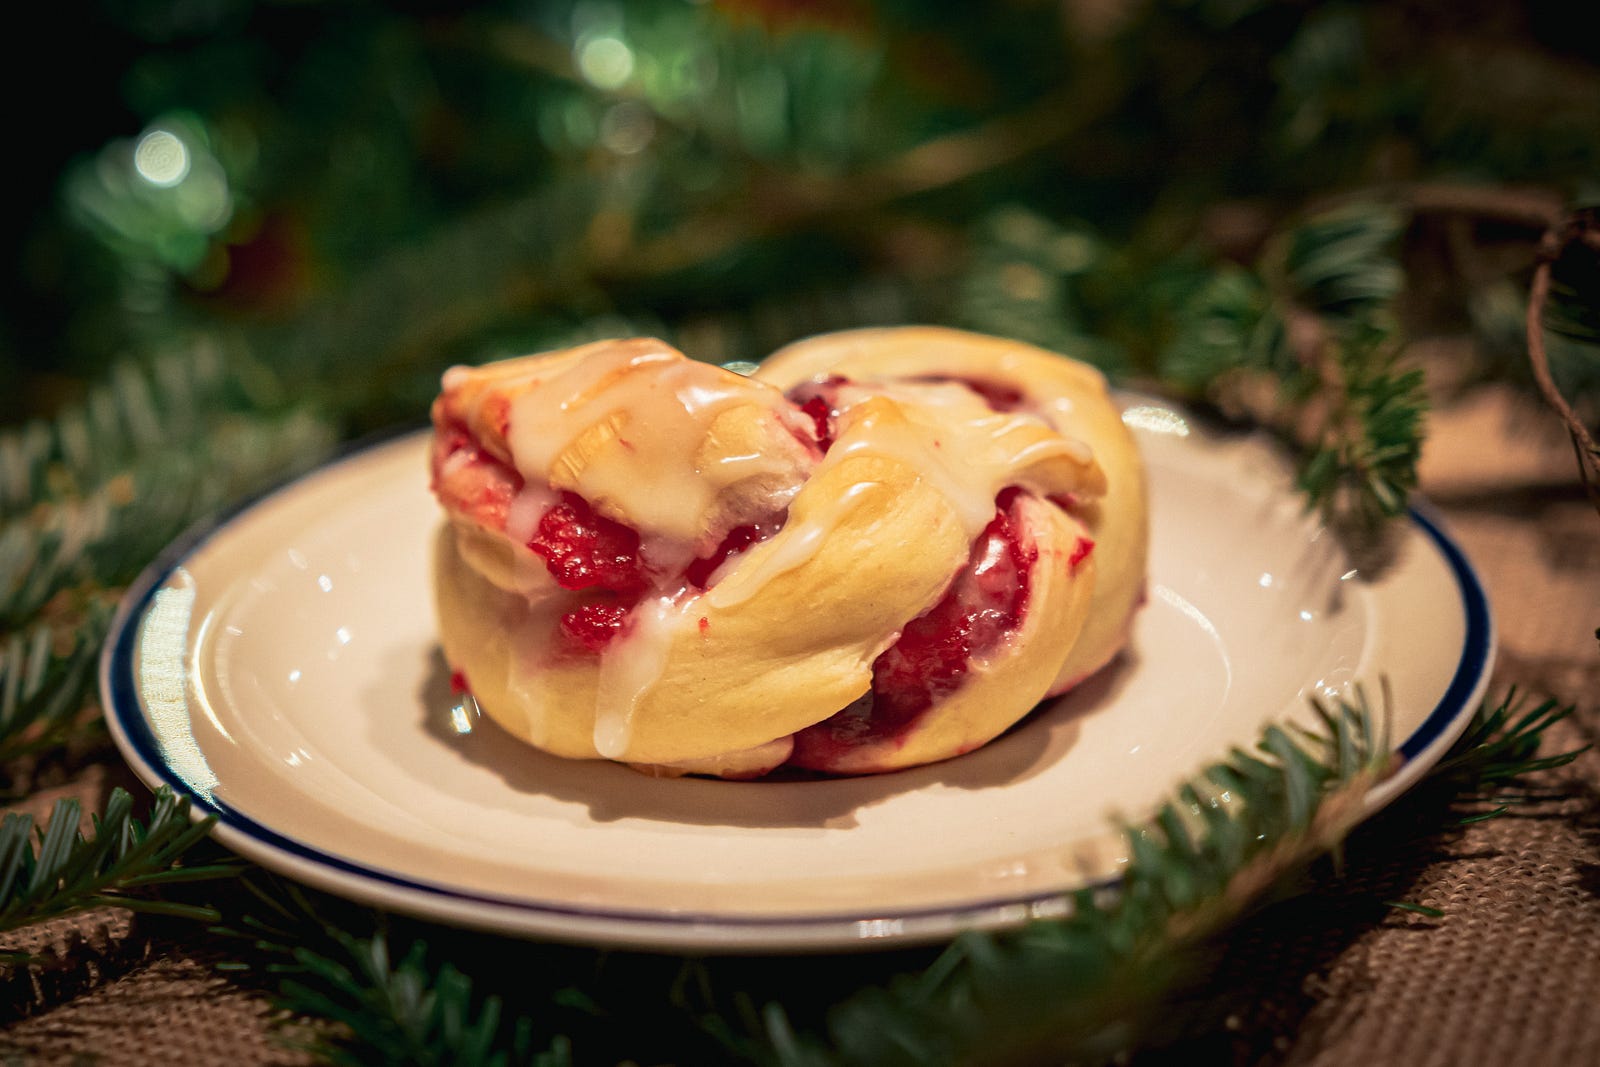 An up close view of a Pastry with a christmas tree and twinkle lights in the background.